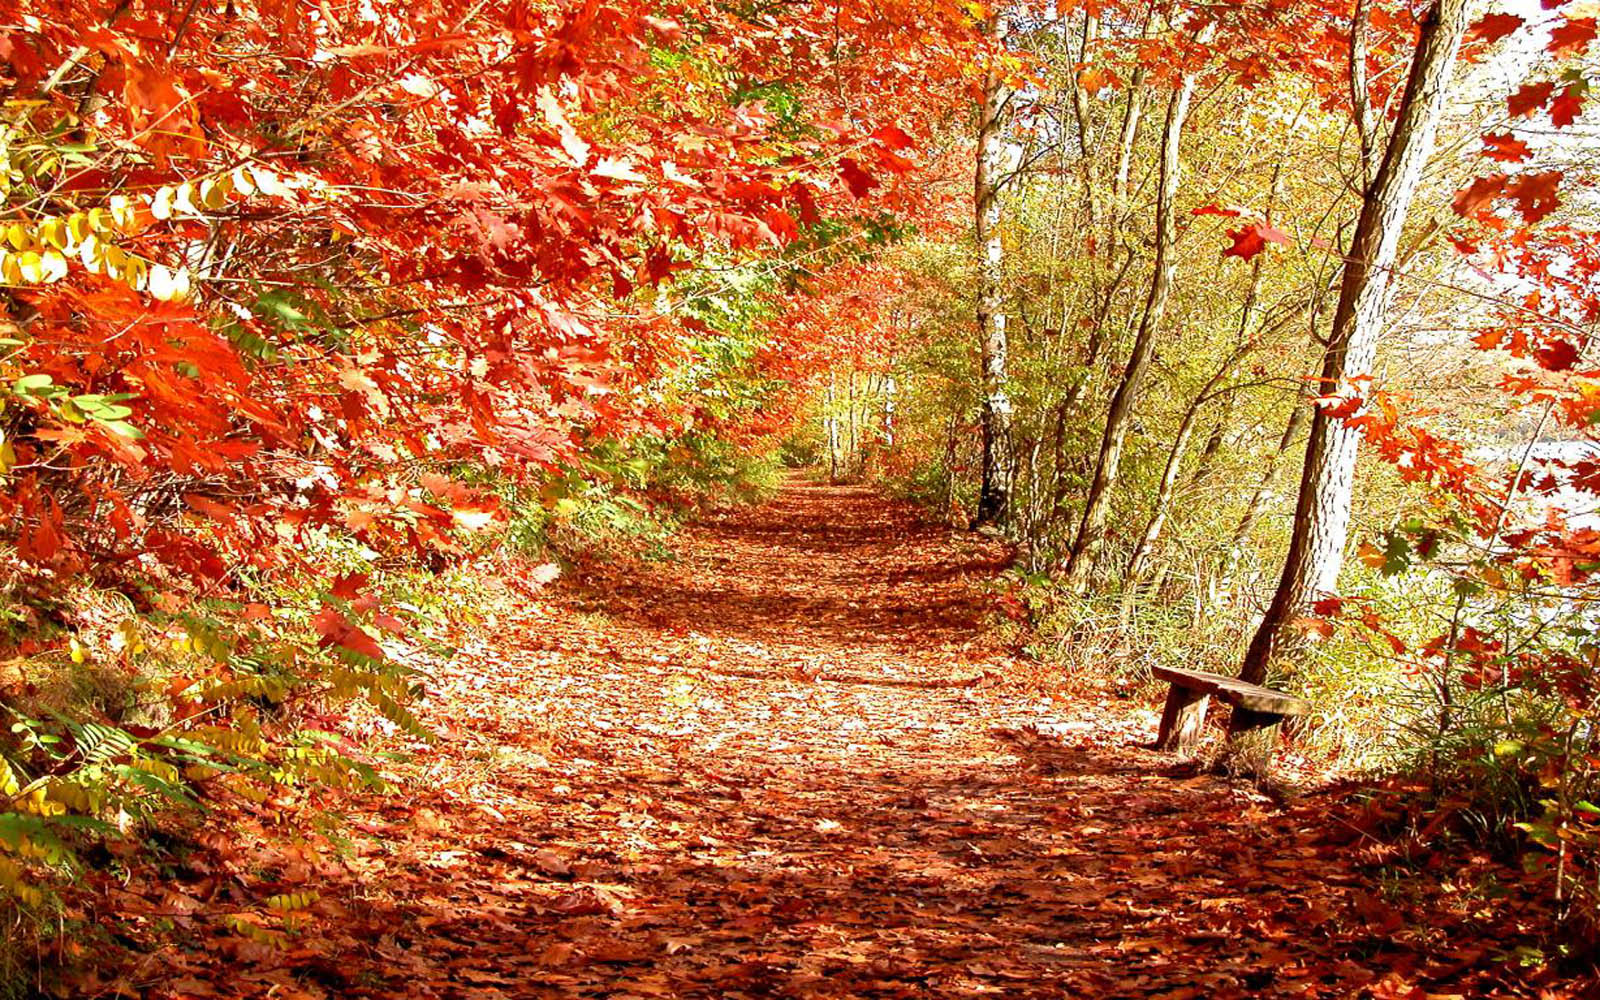 Tag Beautiful Autumn Scenery Wallpaper Background Photos Image